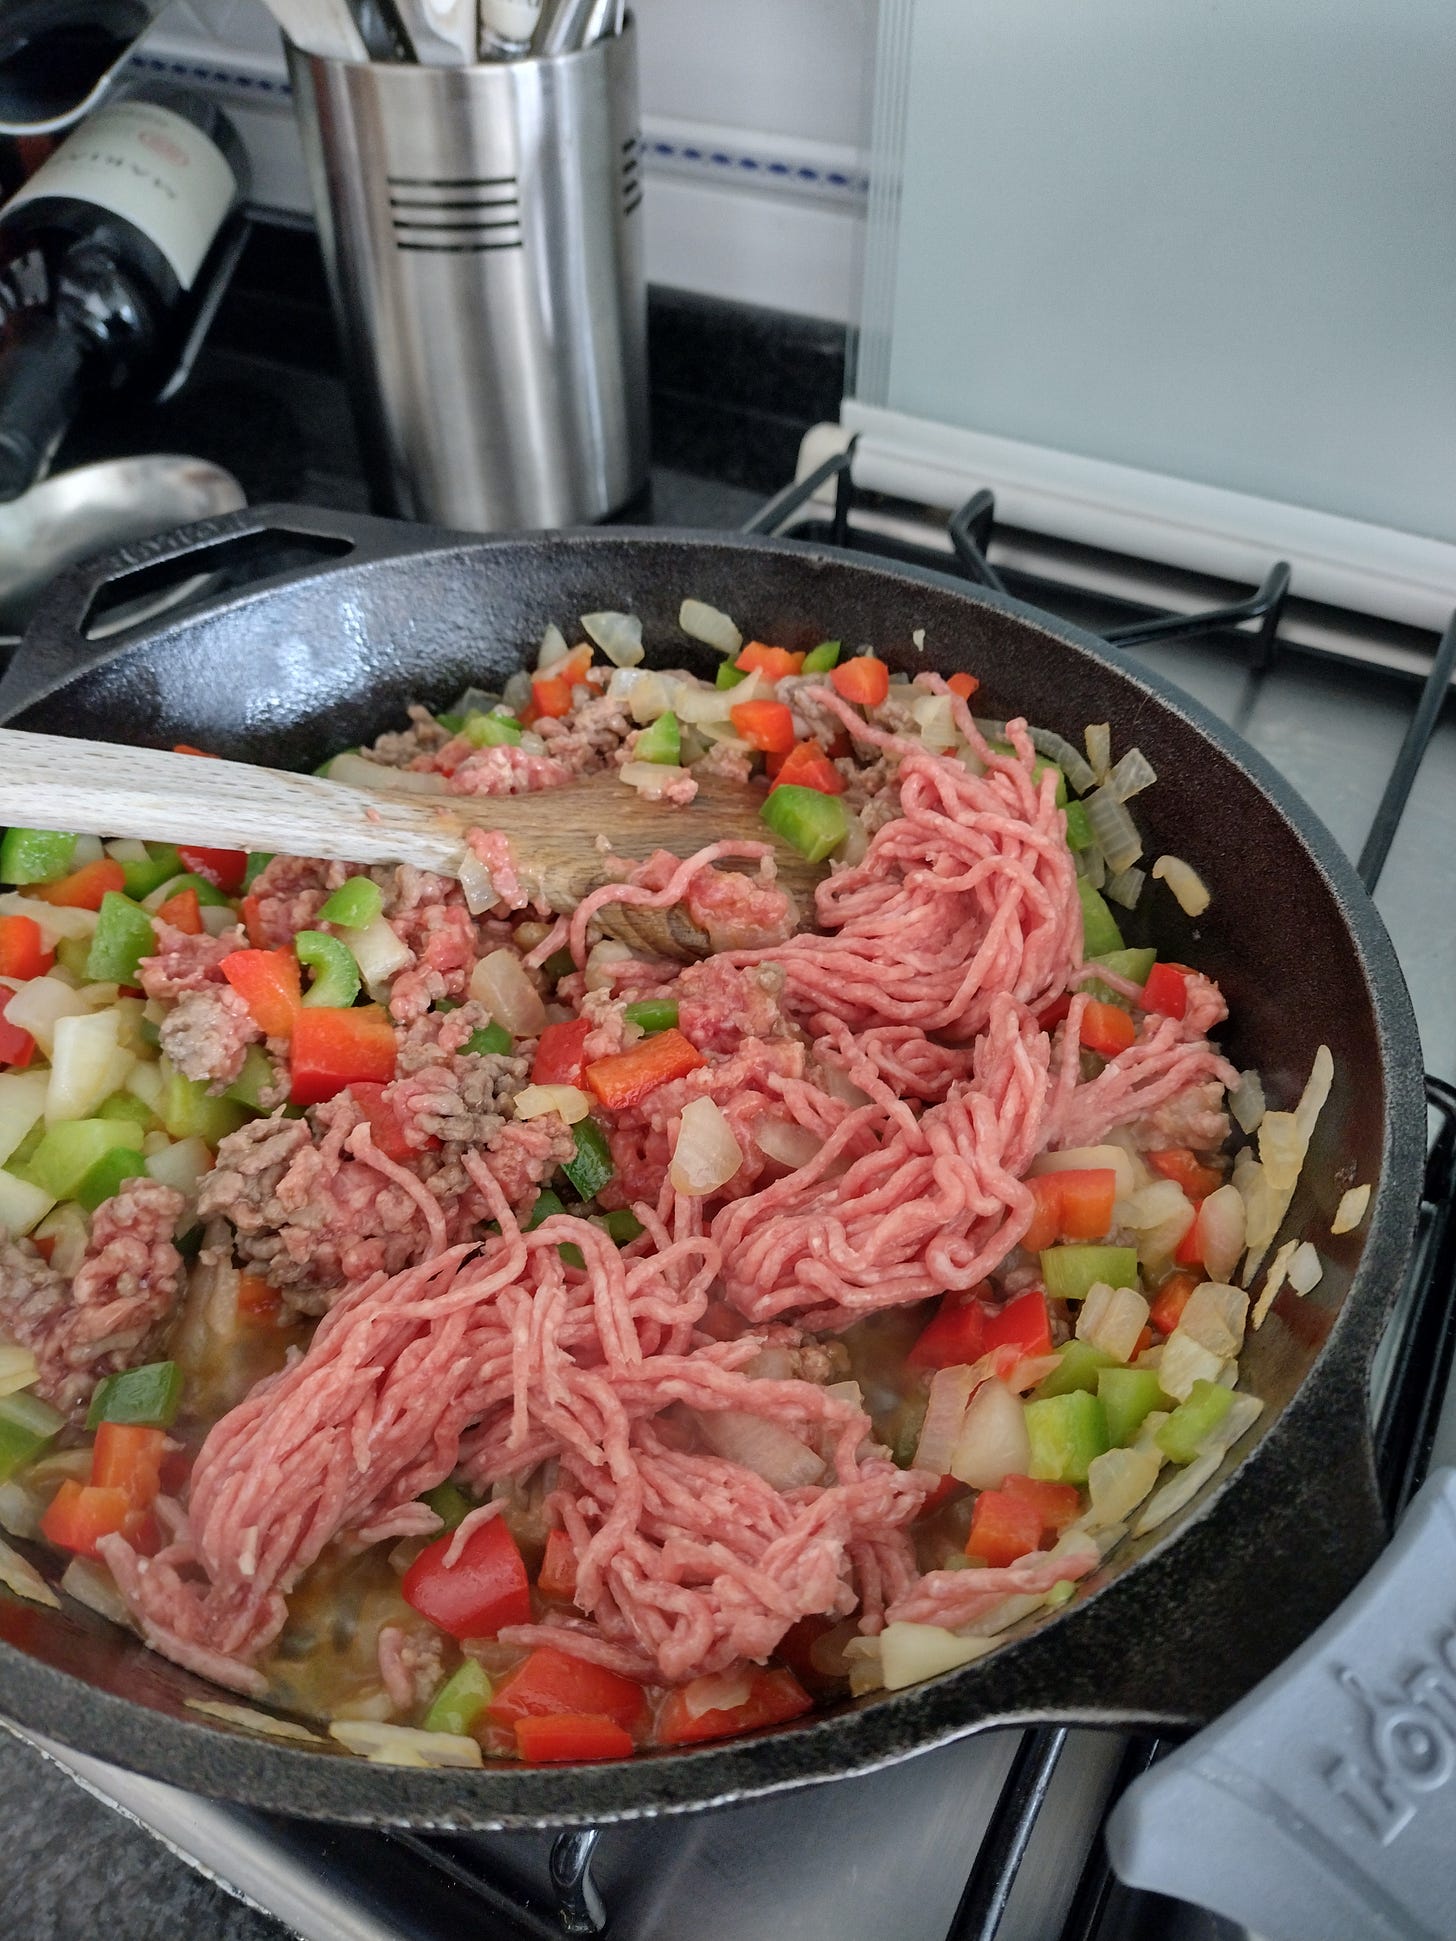 Pan on a stovetop with meat and vegetables